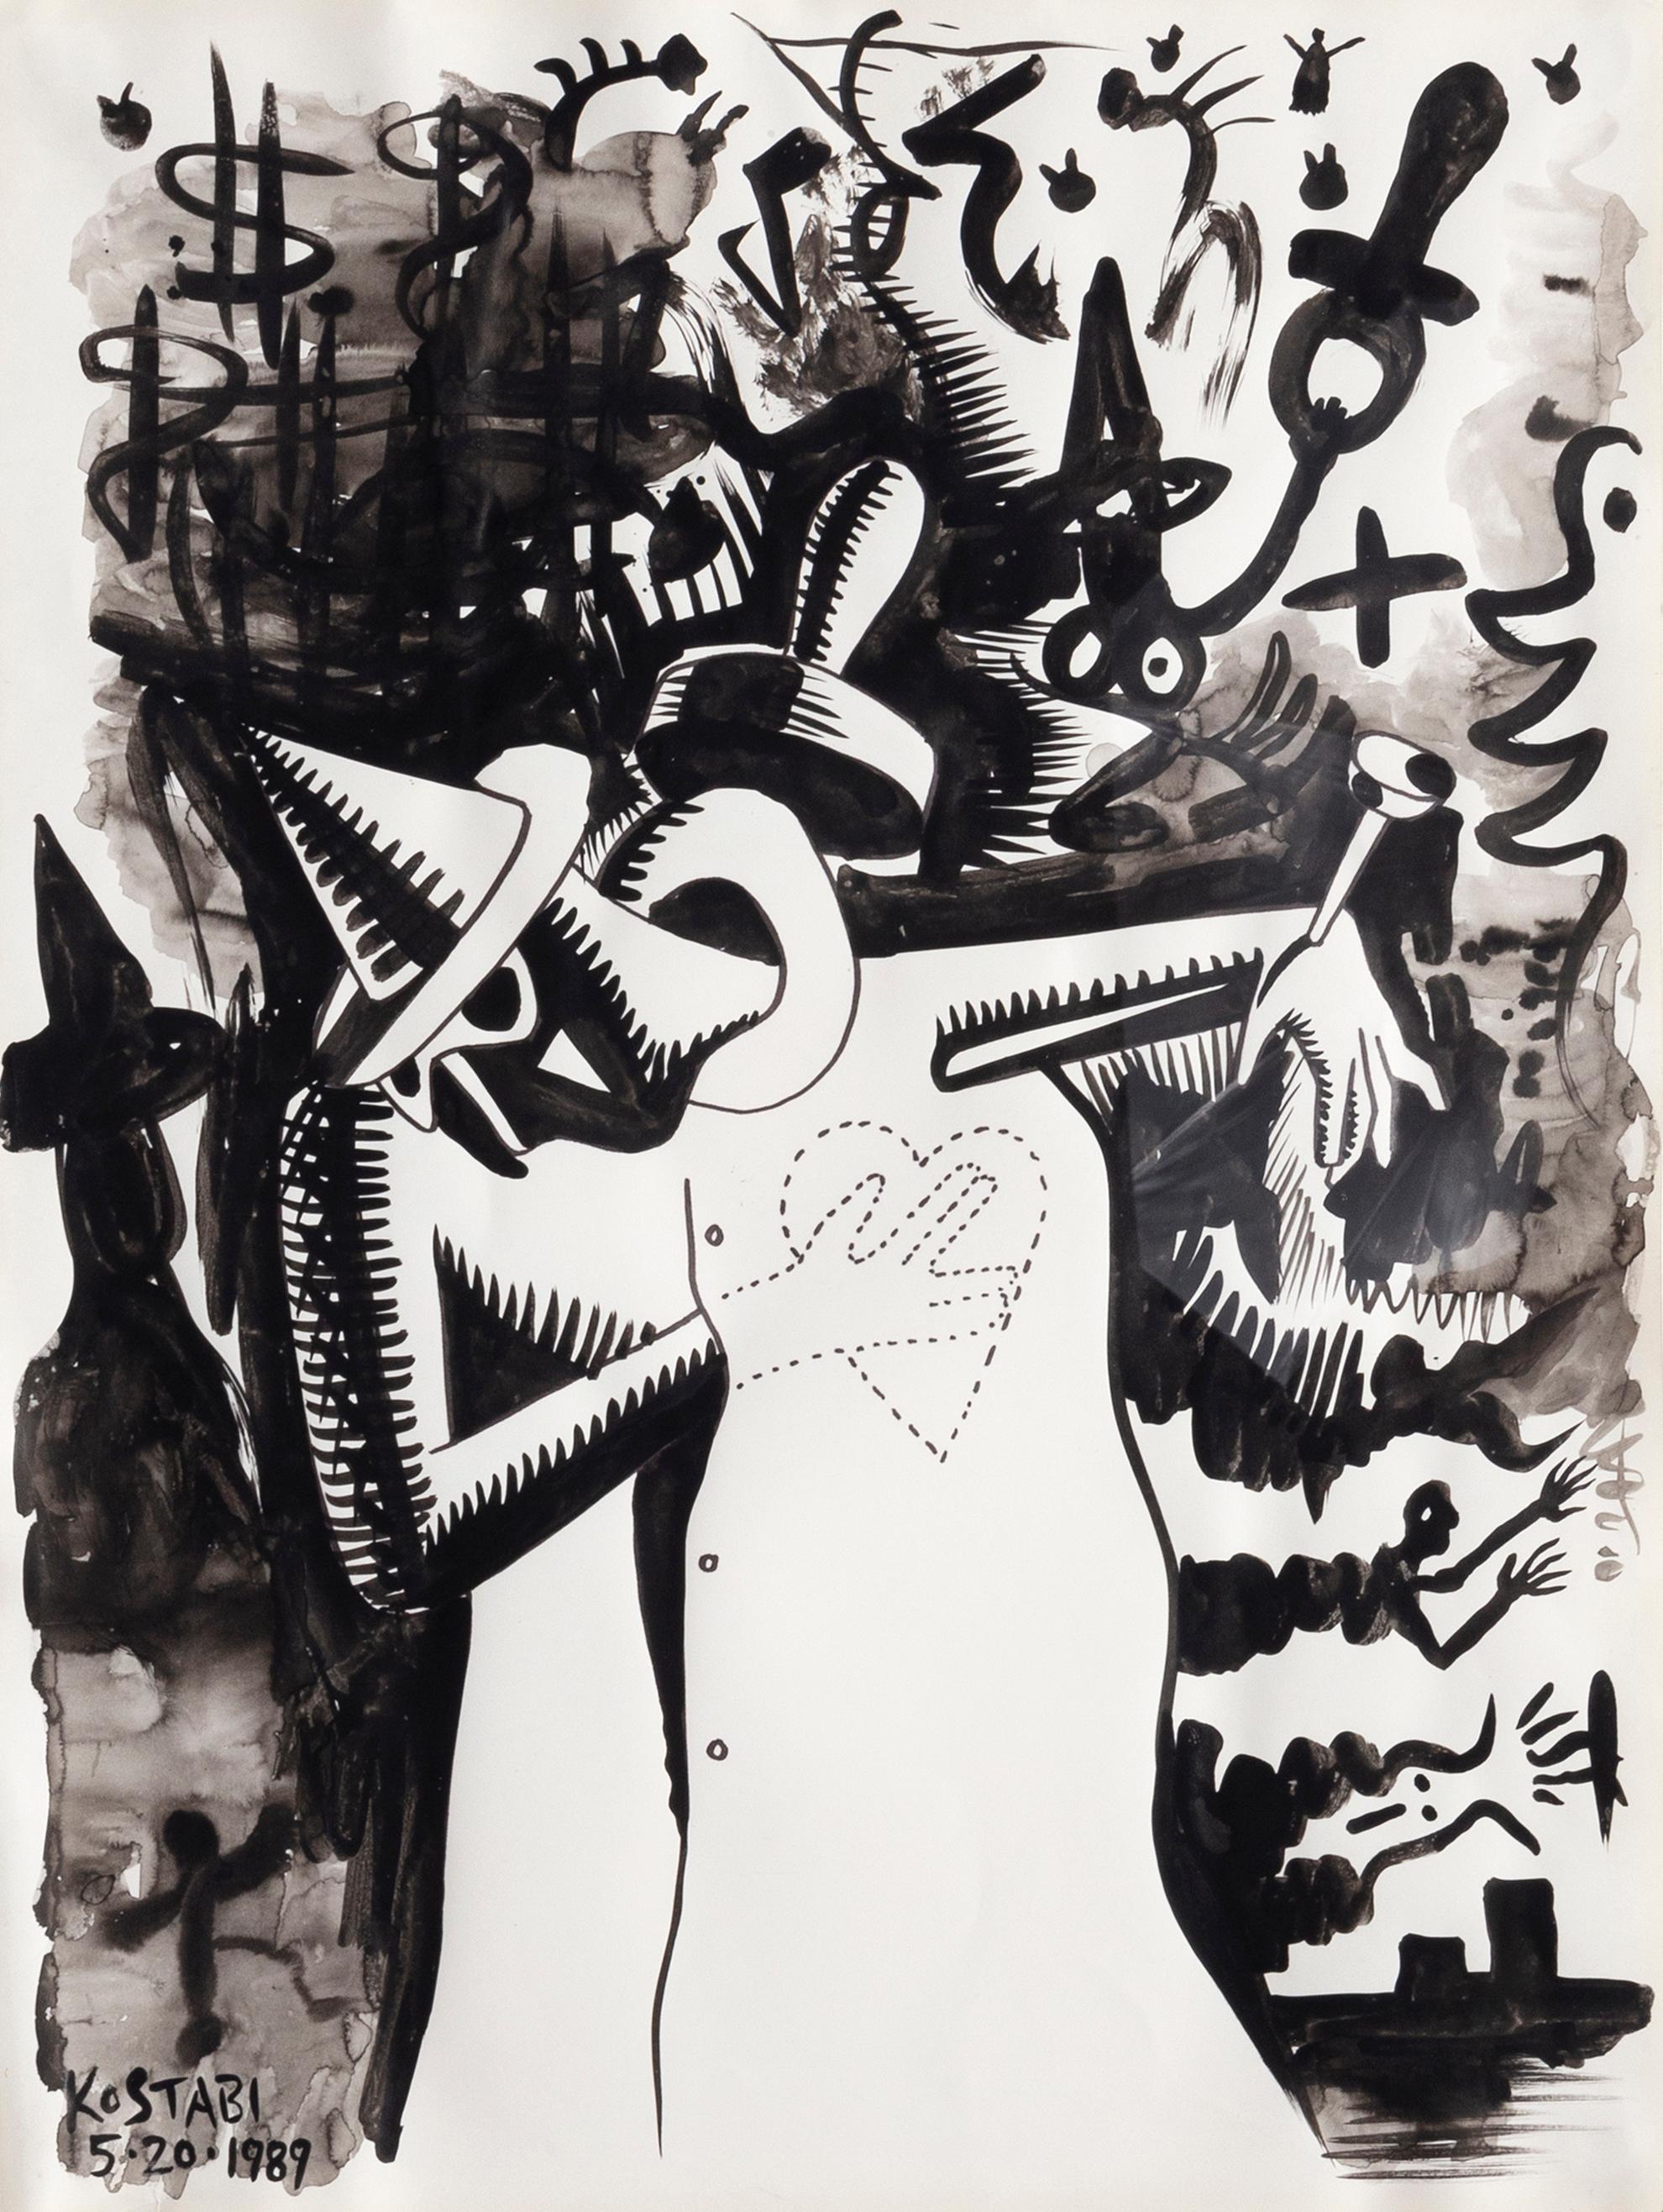 An original ink and wash drawing by Pop artist, Mark Kostabi.  The work is signed and dated lower left. 

Mark Kostabi, American (1960)
Date: May 20th, 1989
Ink and Wash on paper, signed and dated lower left
Size: 23.5 x 17.5 in. (59.69 x 44.45